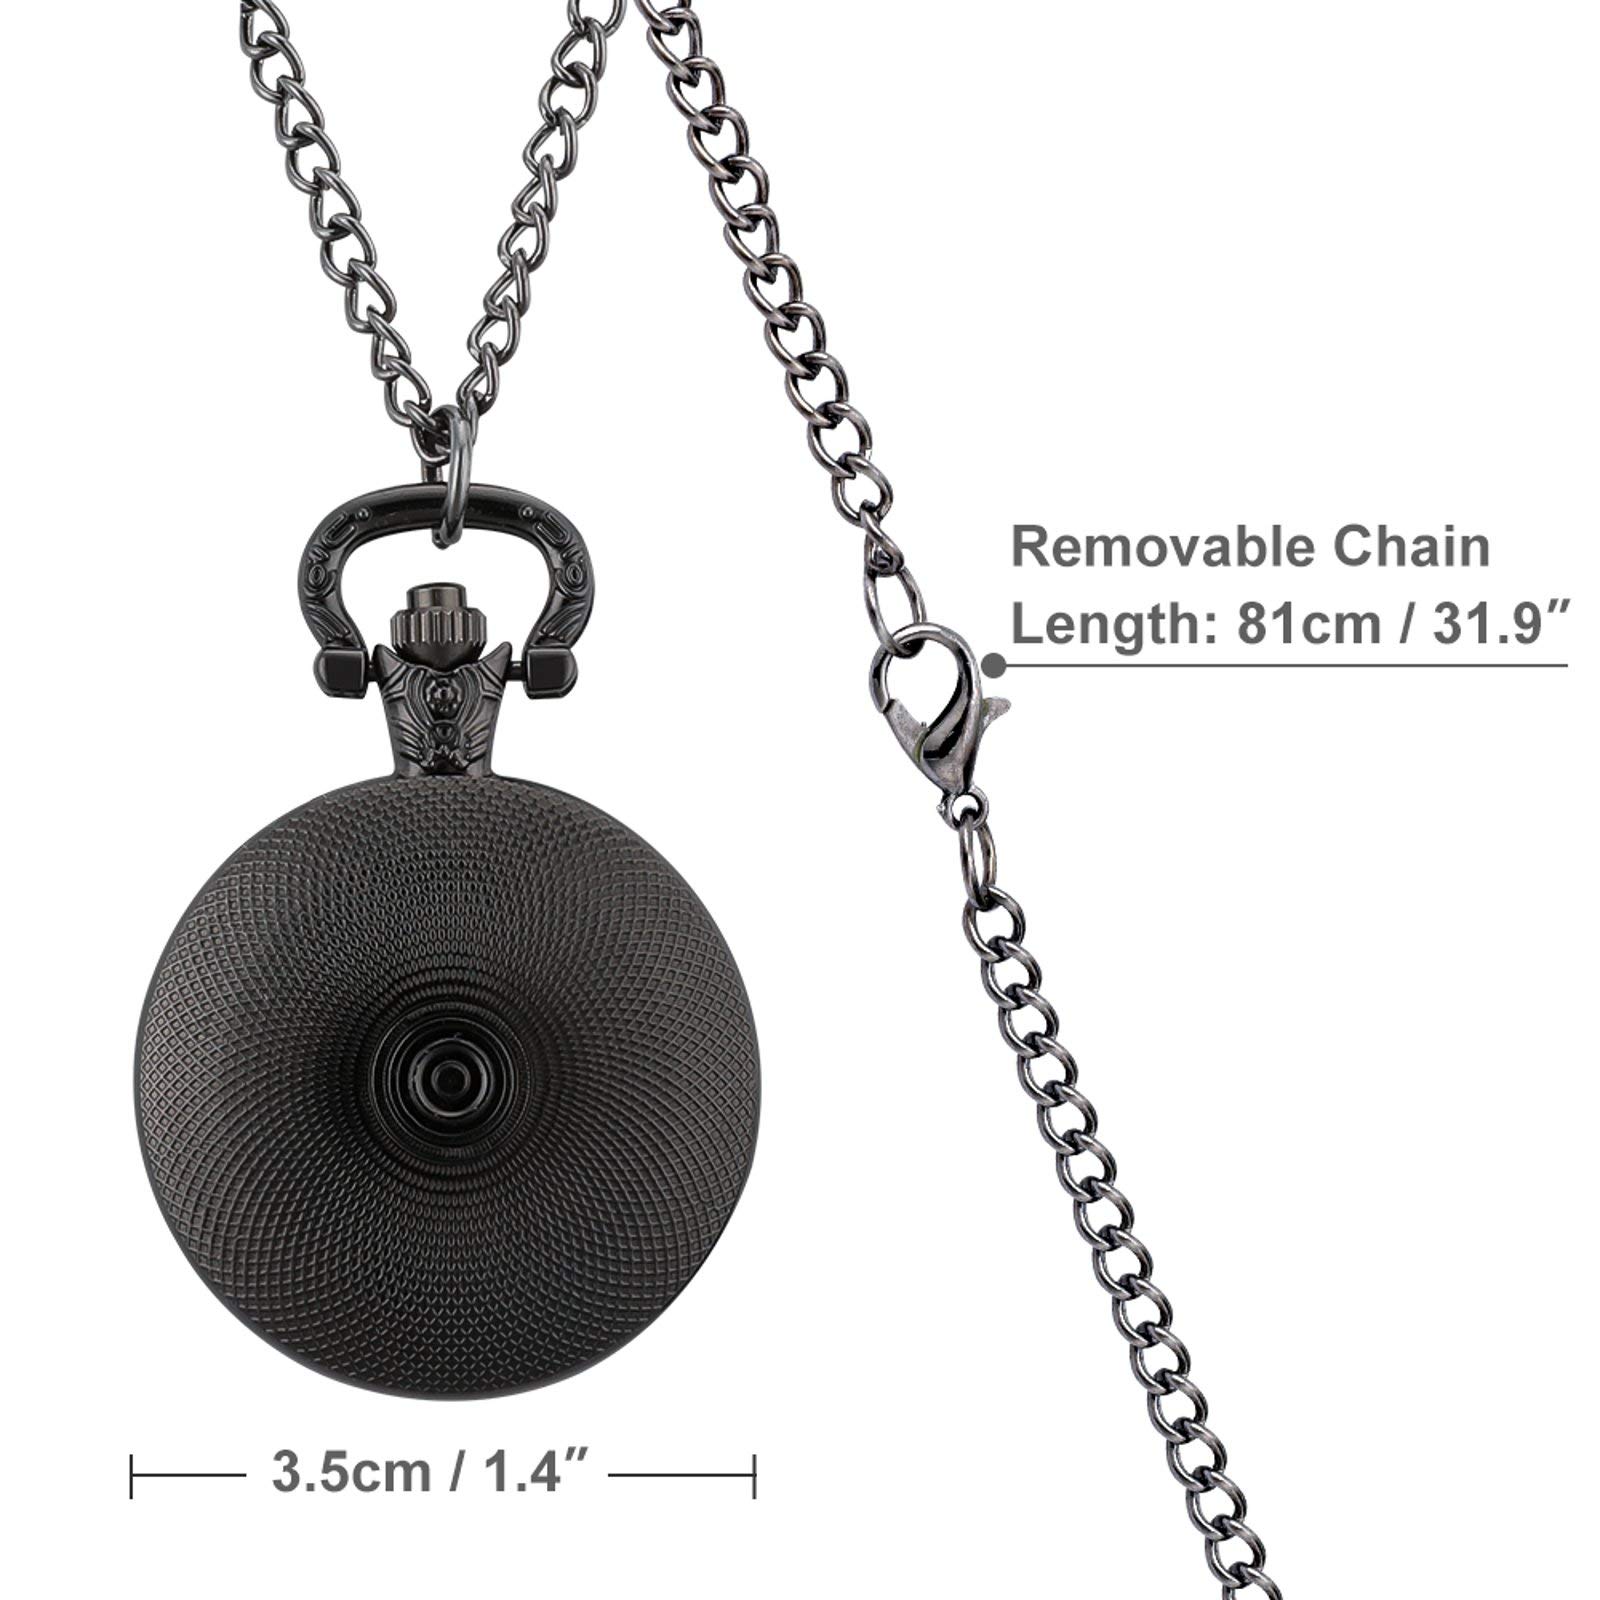 Melting Ice Cream Balls Personalized Pocket Watch Vintage Numerals Scale Quartz Watches Pendant Necklace with Chain